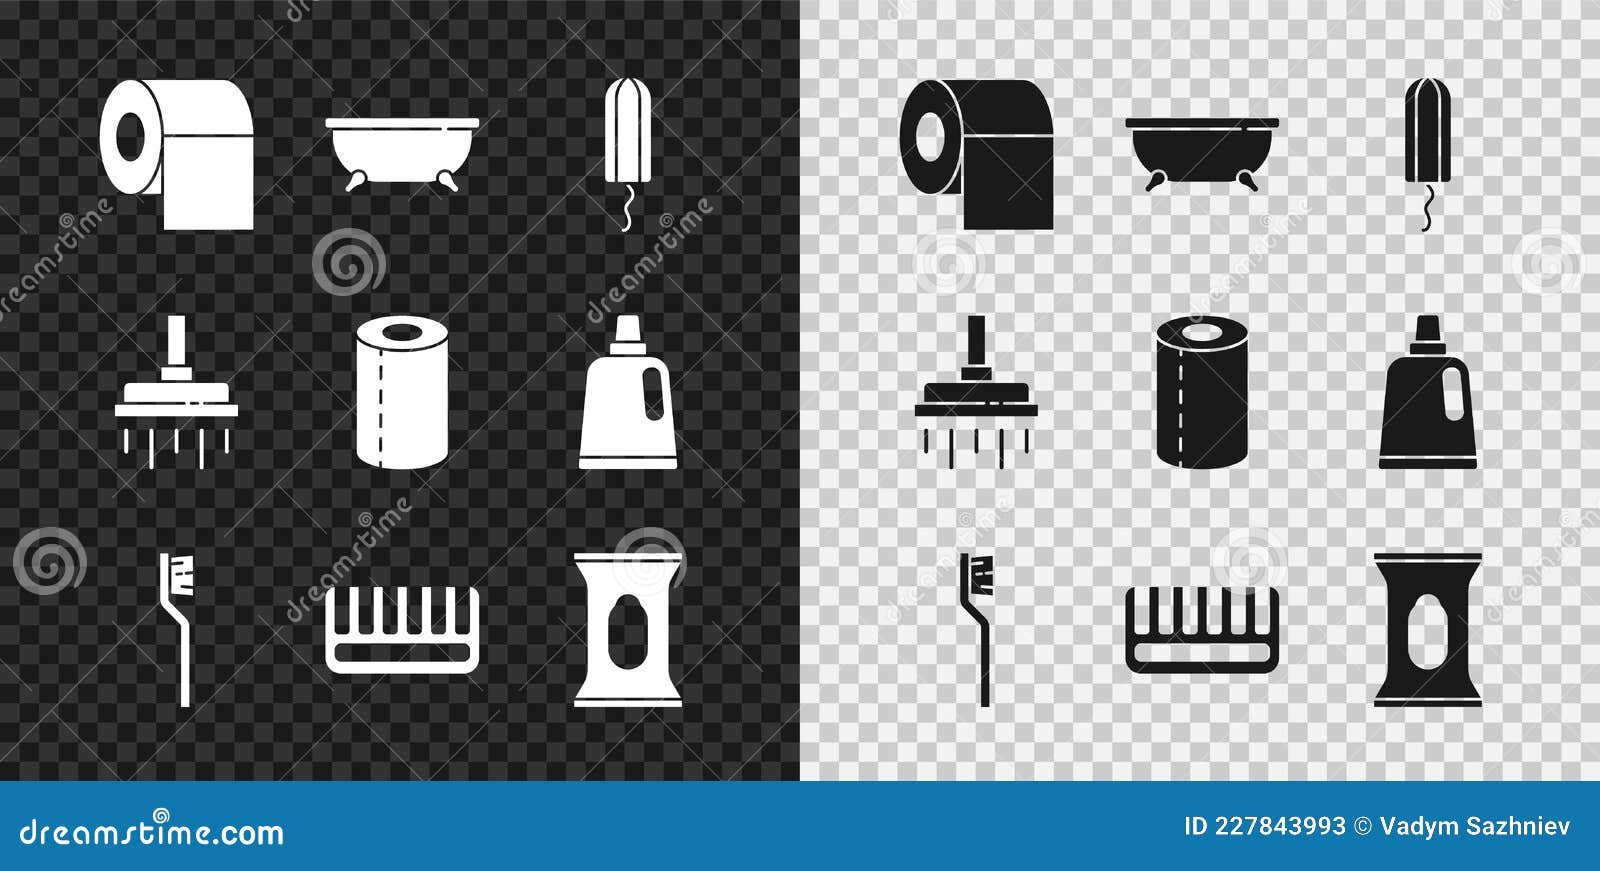 Set Toilet Paper Roll, Bathtub, Sanitary Tampon, Toothbrush, Hairbrush, Wet  Wipe Pack, Shower Head and Paper Towel Icon Stock Vector - Illustration of  roll, isolated: 227843993